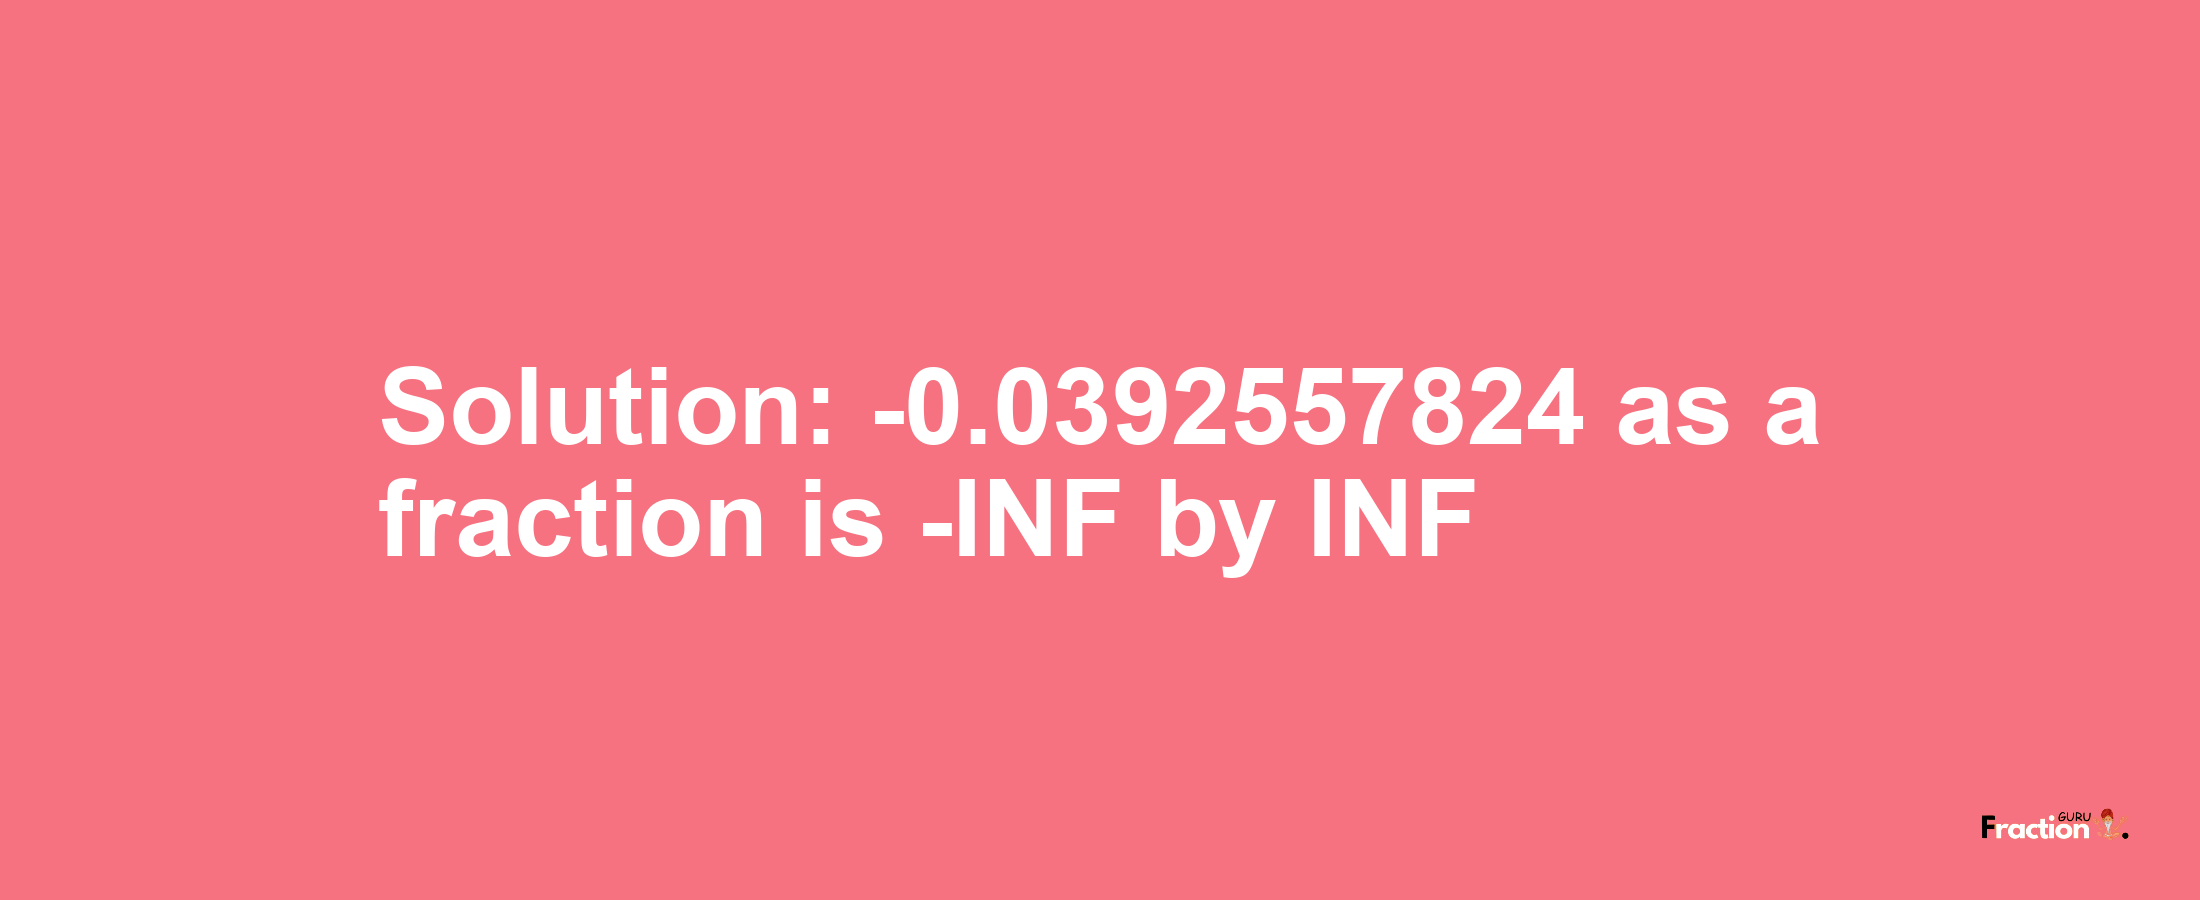 Solution:-0.0392557824 as a fraction is -INF/INF